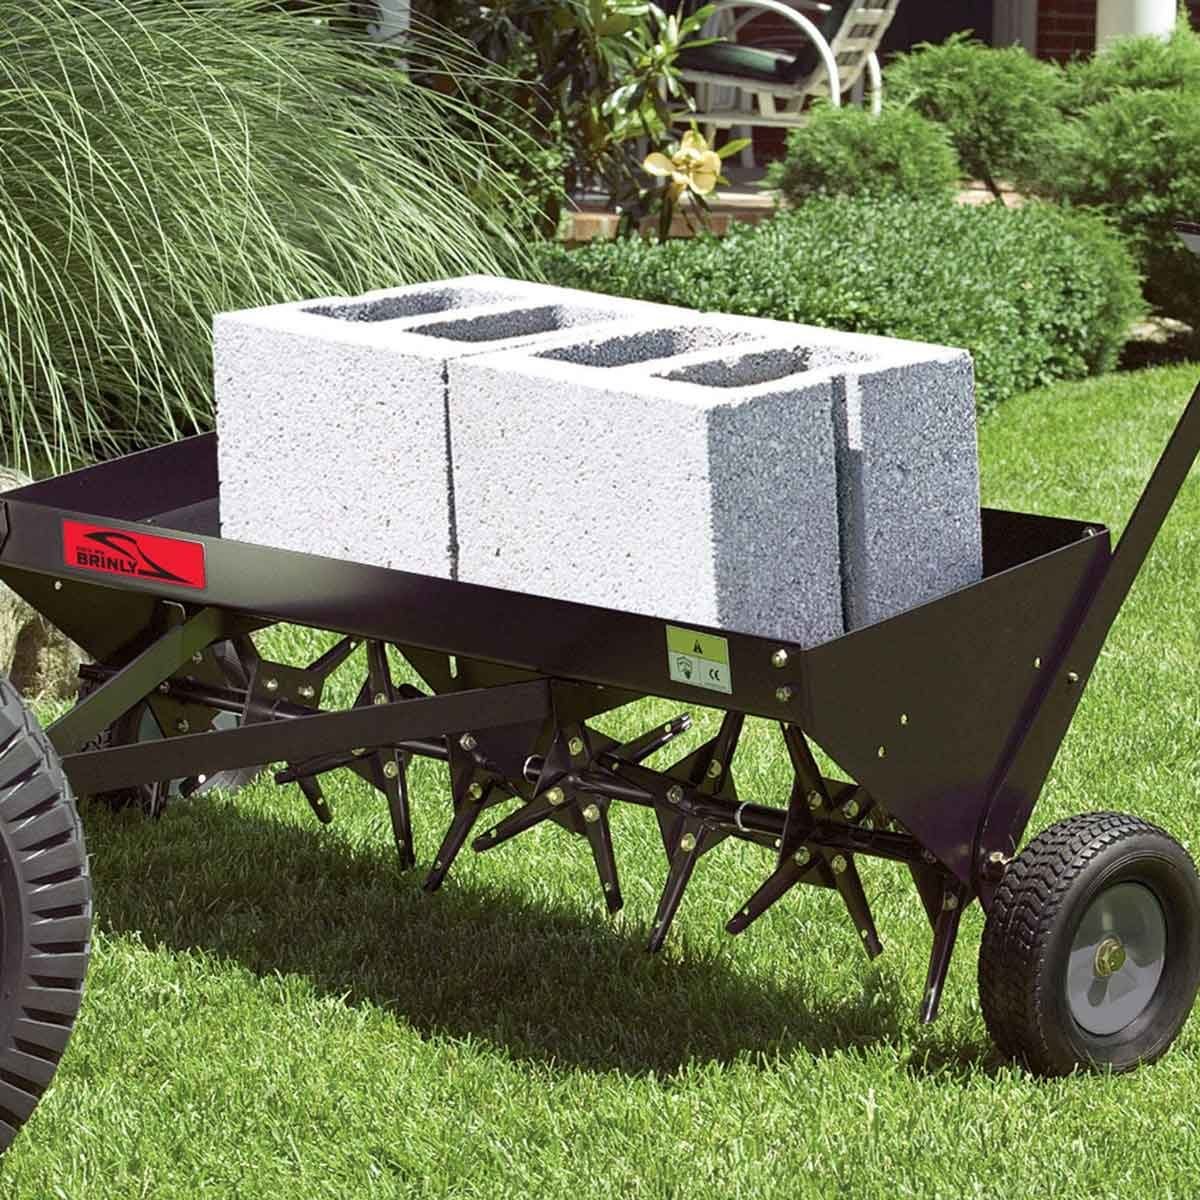 When and Where to Rent a Lawn Aerator